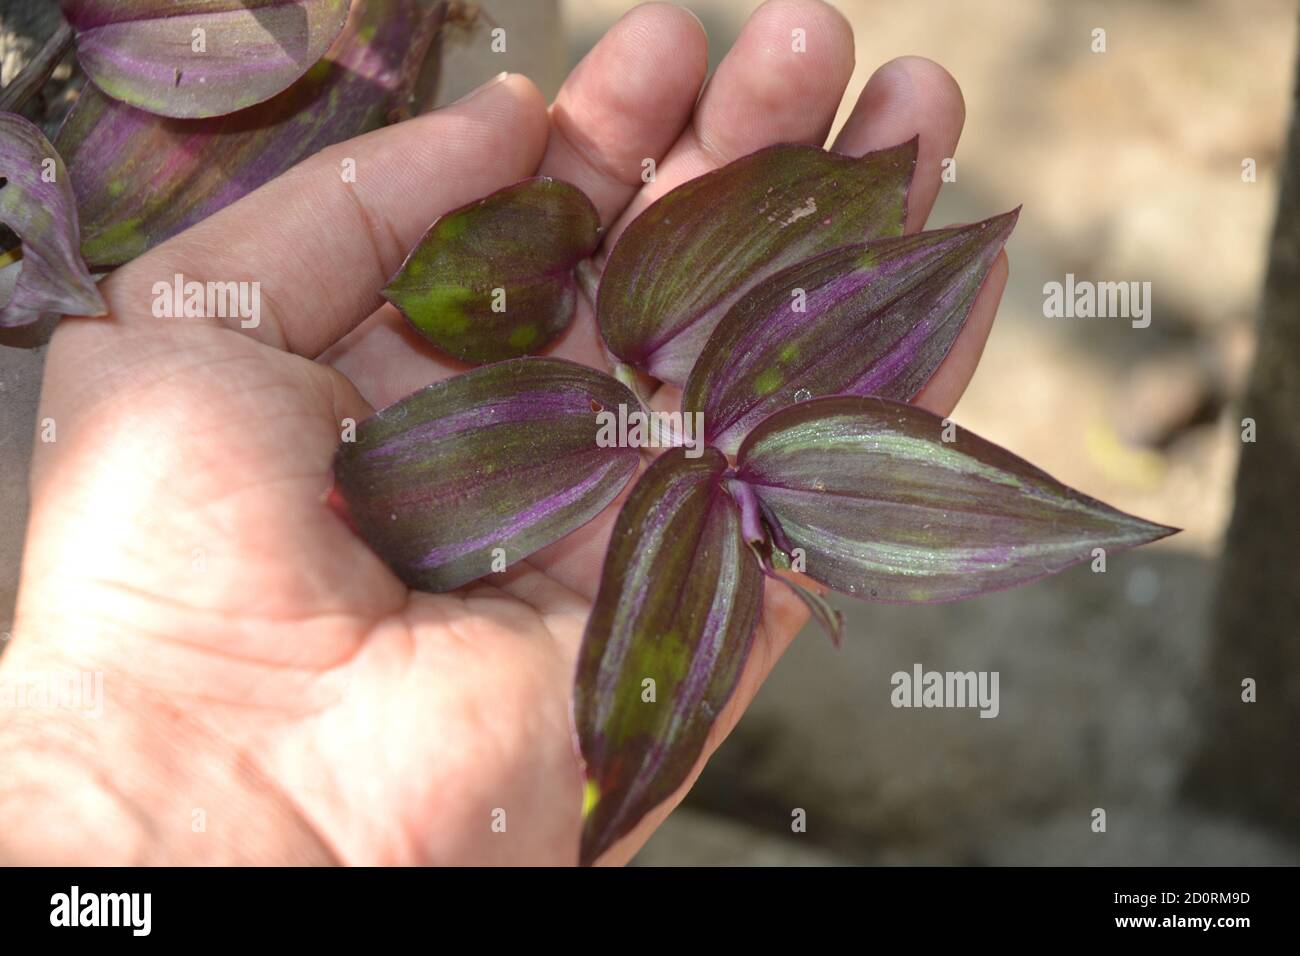 small plant in human hands, pot. Stock Photo